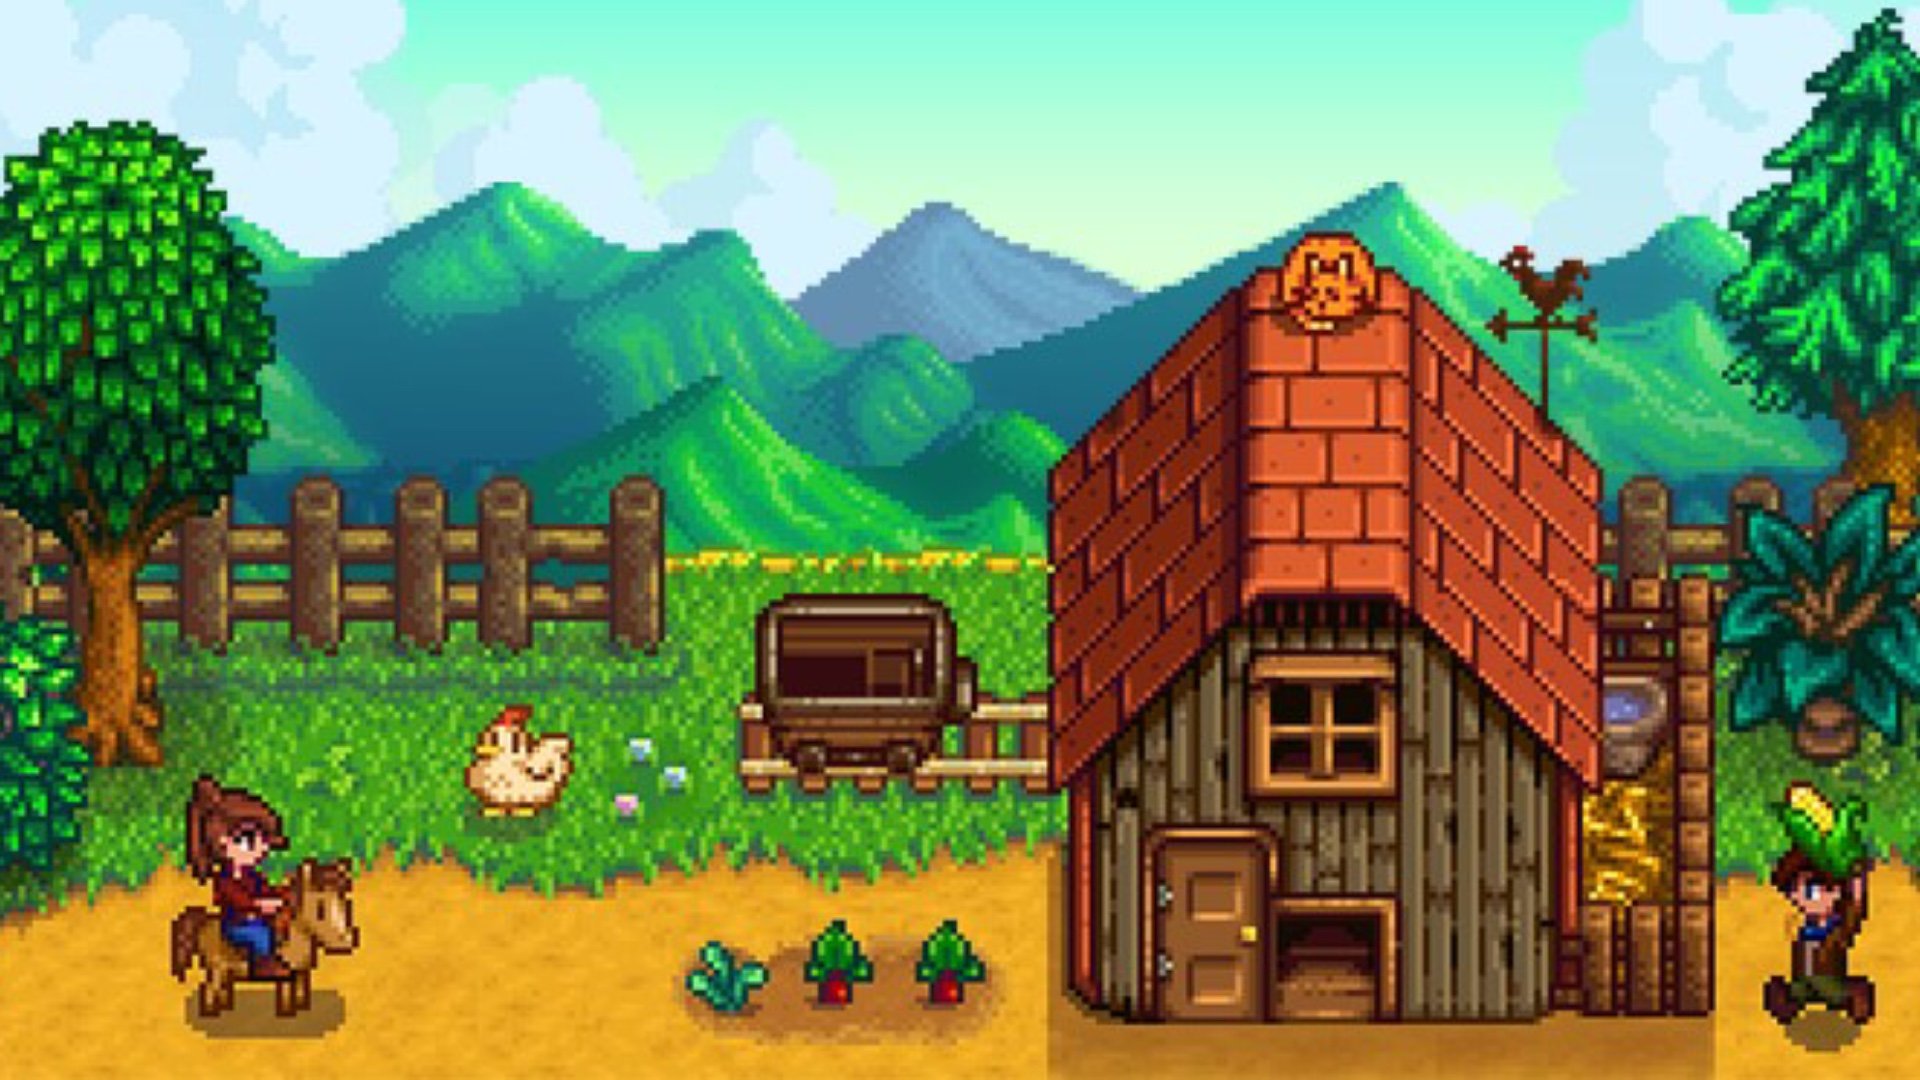 Stardew Valley Ios Vs Nintendo Switch What Platform Should You Buy It On Toucharcade